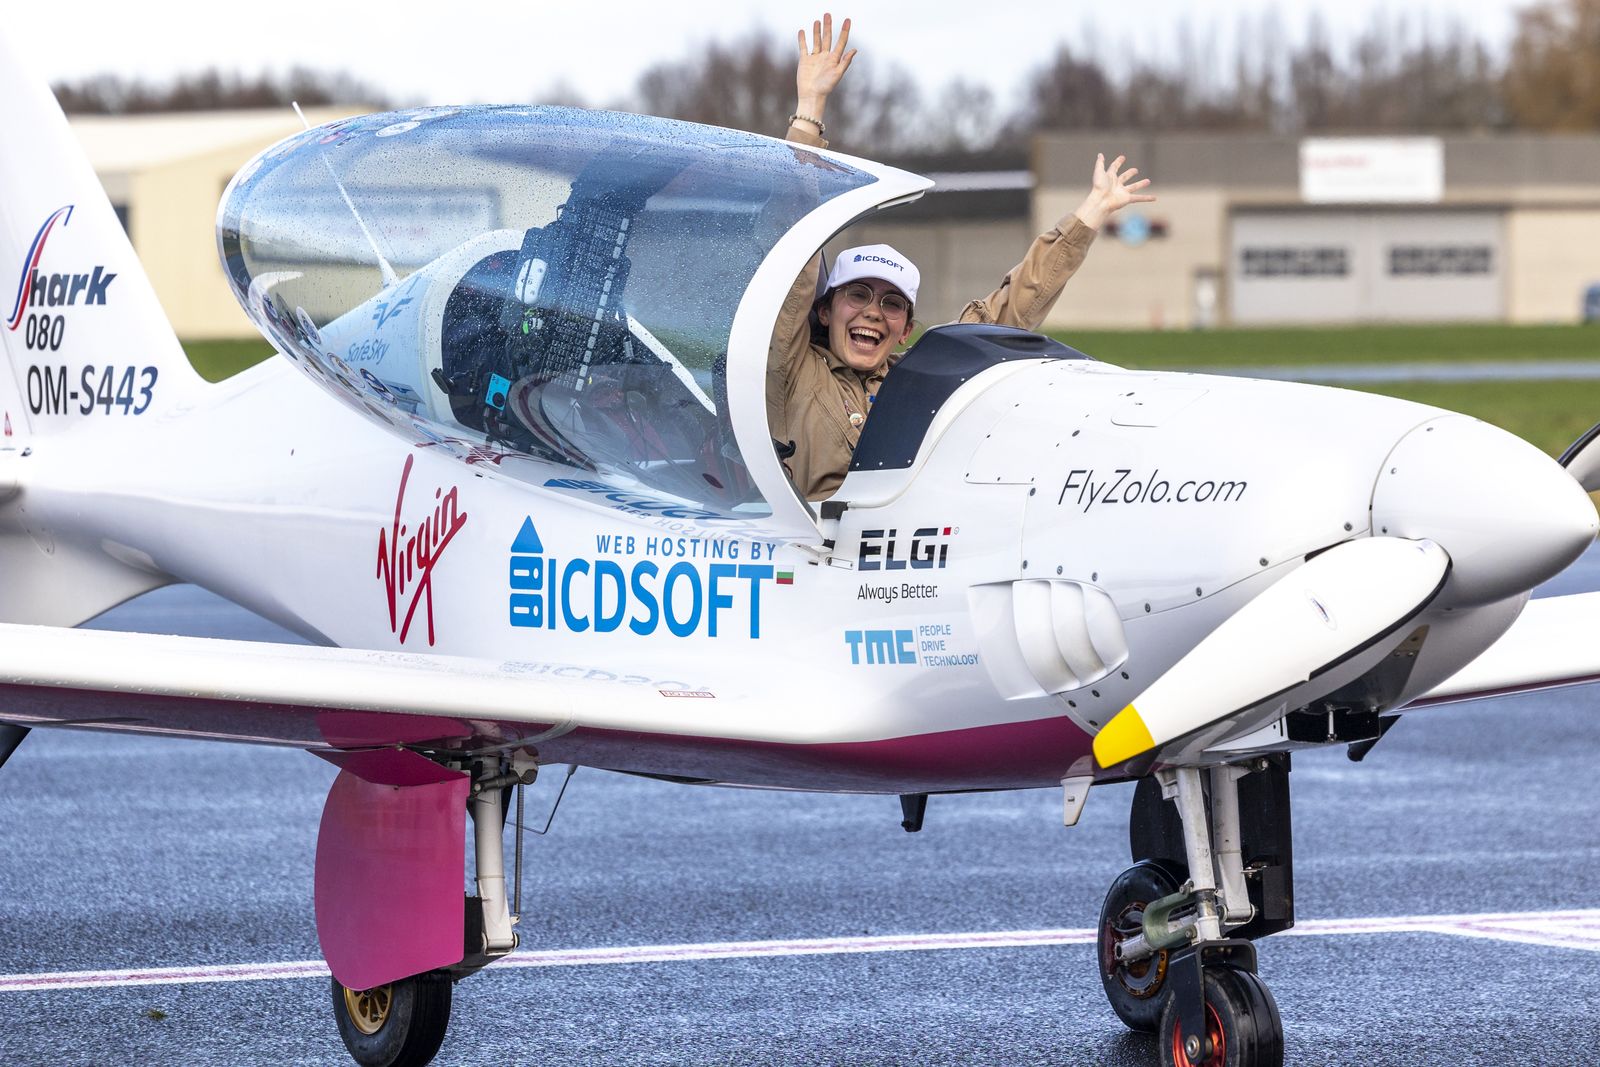 Who Was the First Woman to Fly Solo Around the World?